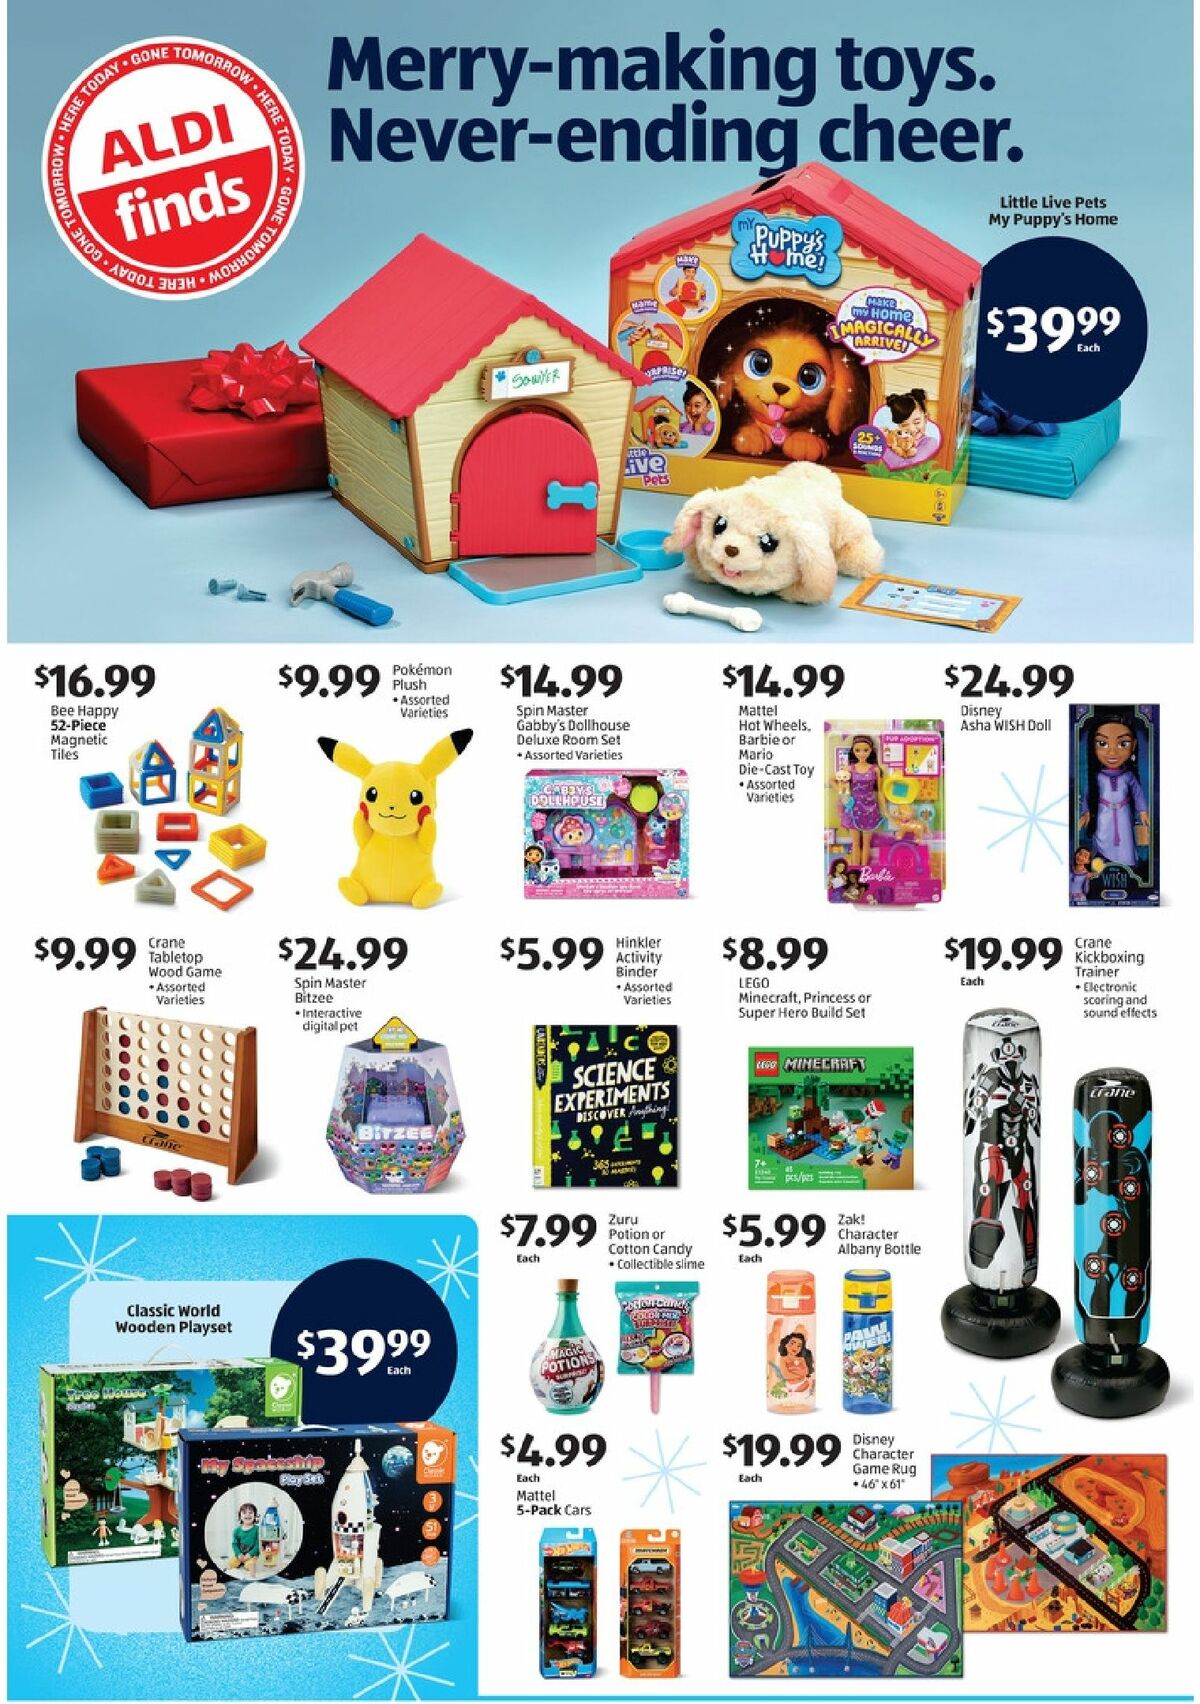 ALDI Weekly Ad from December 6